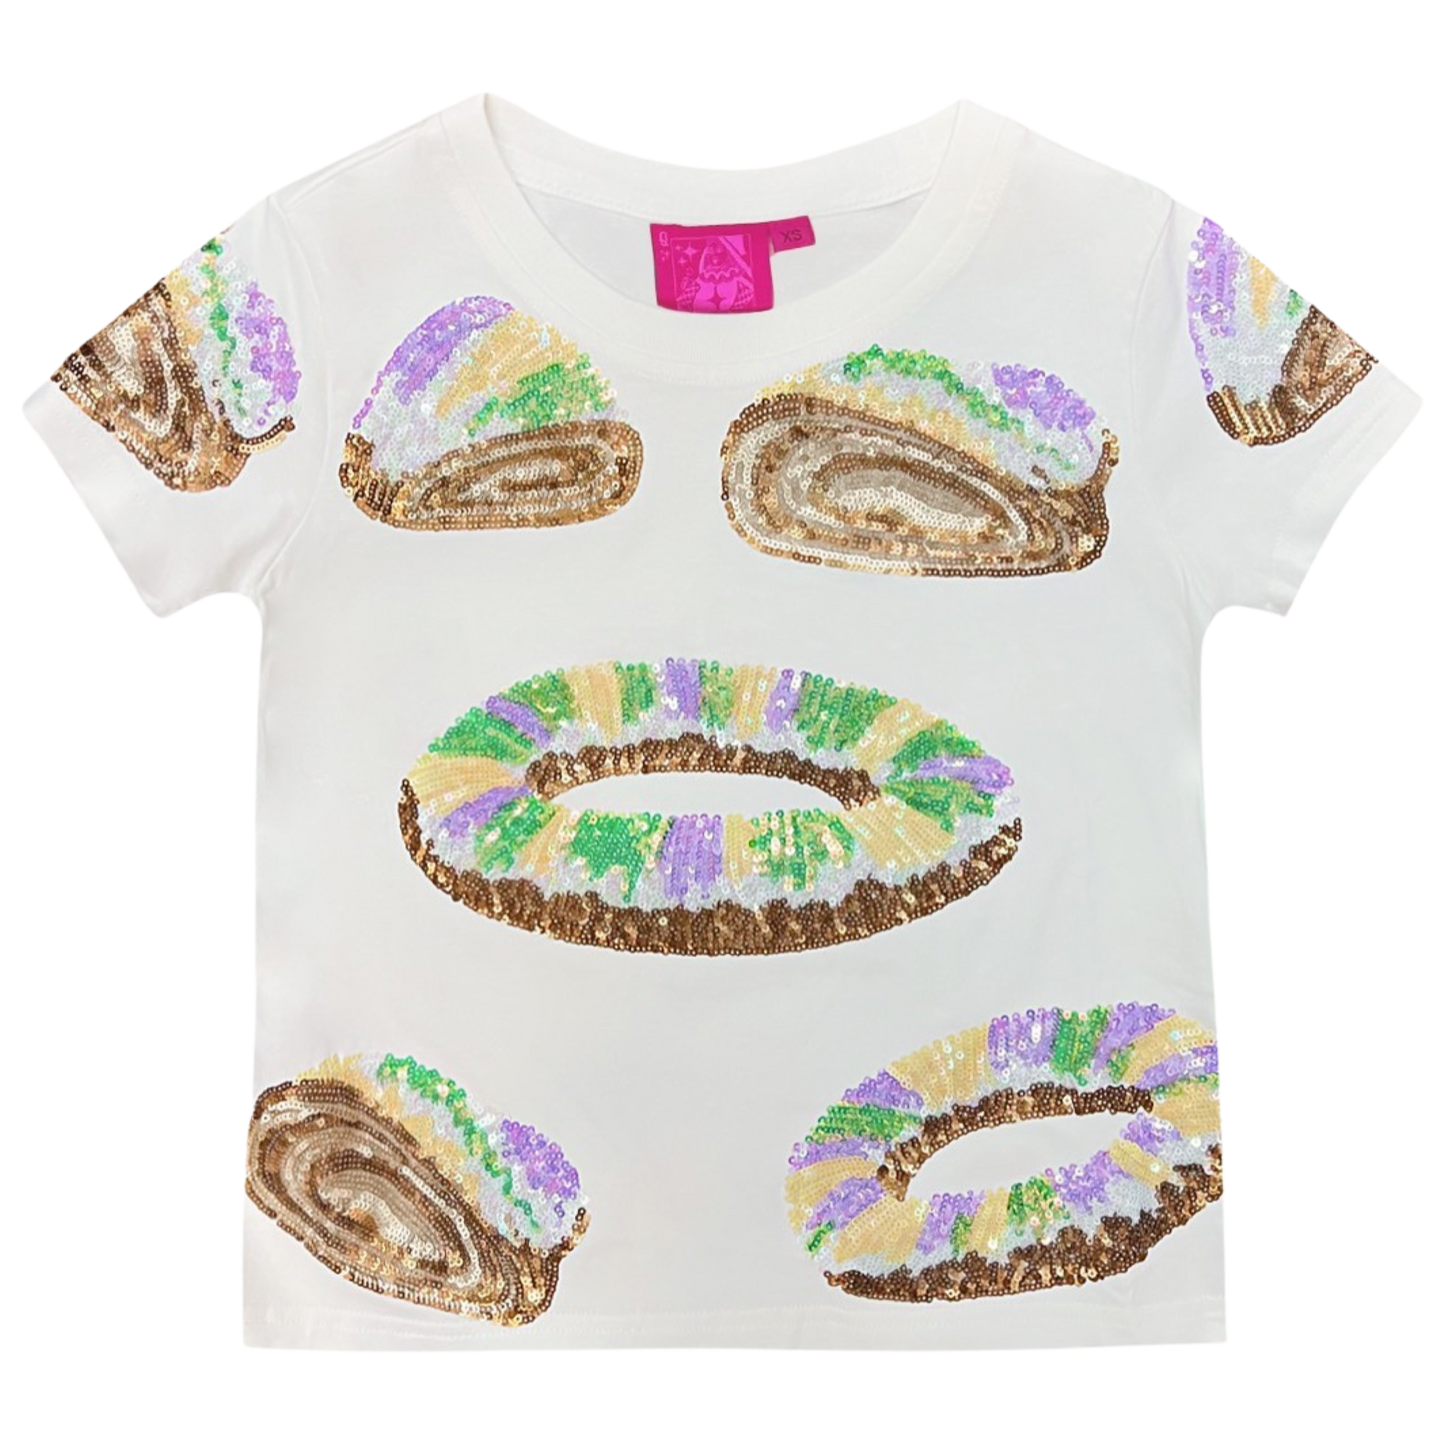 Queen of Sparkles Top - King Cake